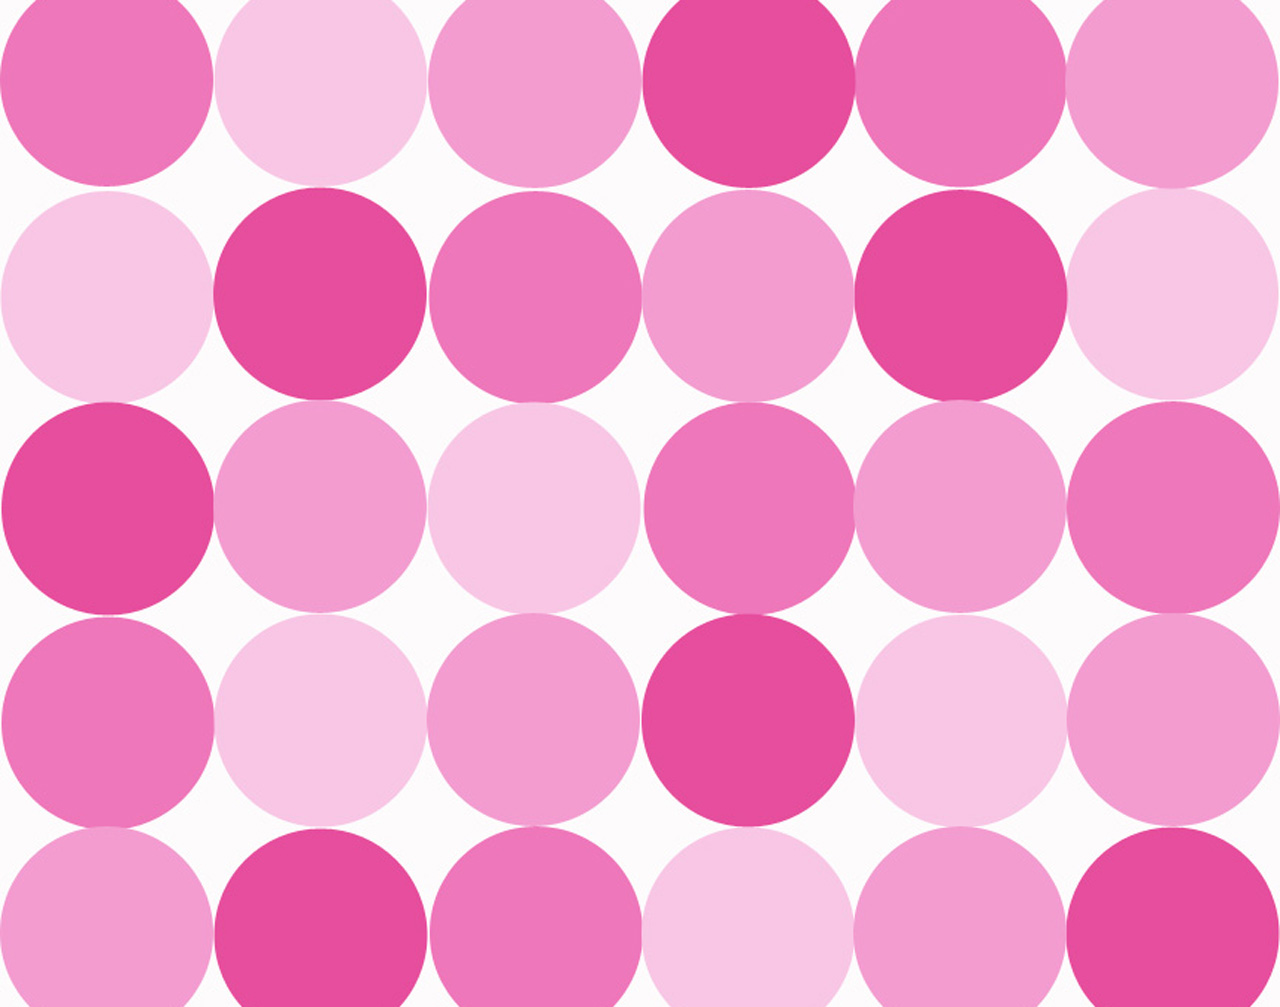 Pink And White Polka Dot Backgrounds - ClipArt Best